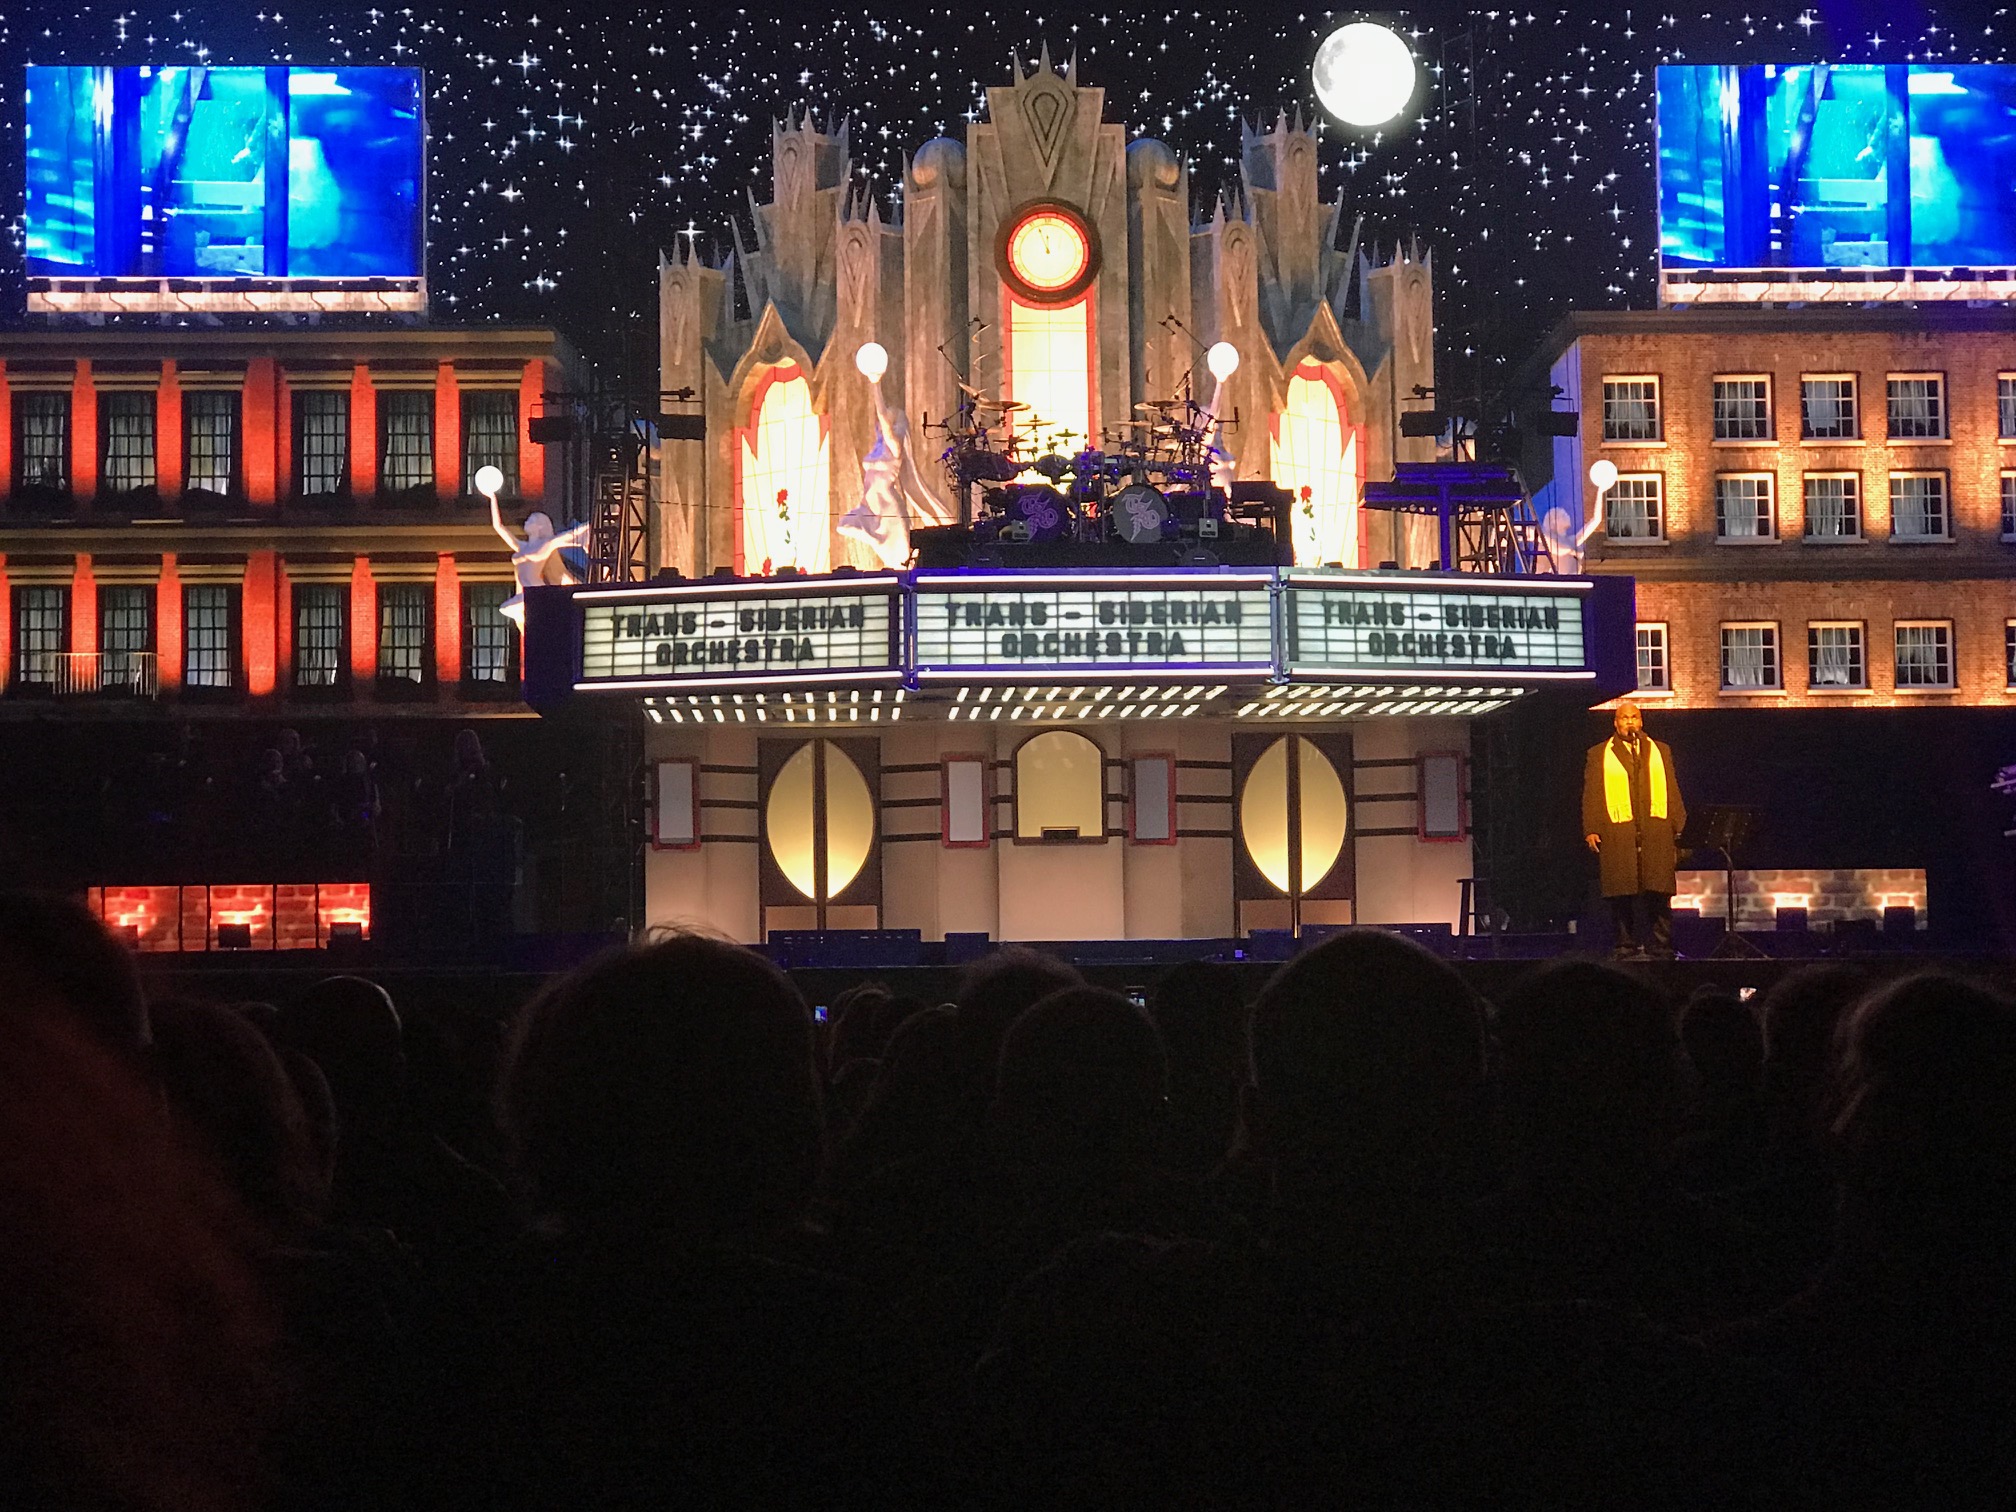 Trans Siberian Orchestra Provides A Stunning Spectacle This Holiday Season